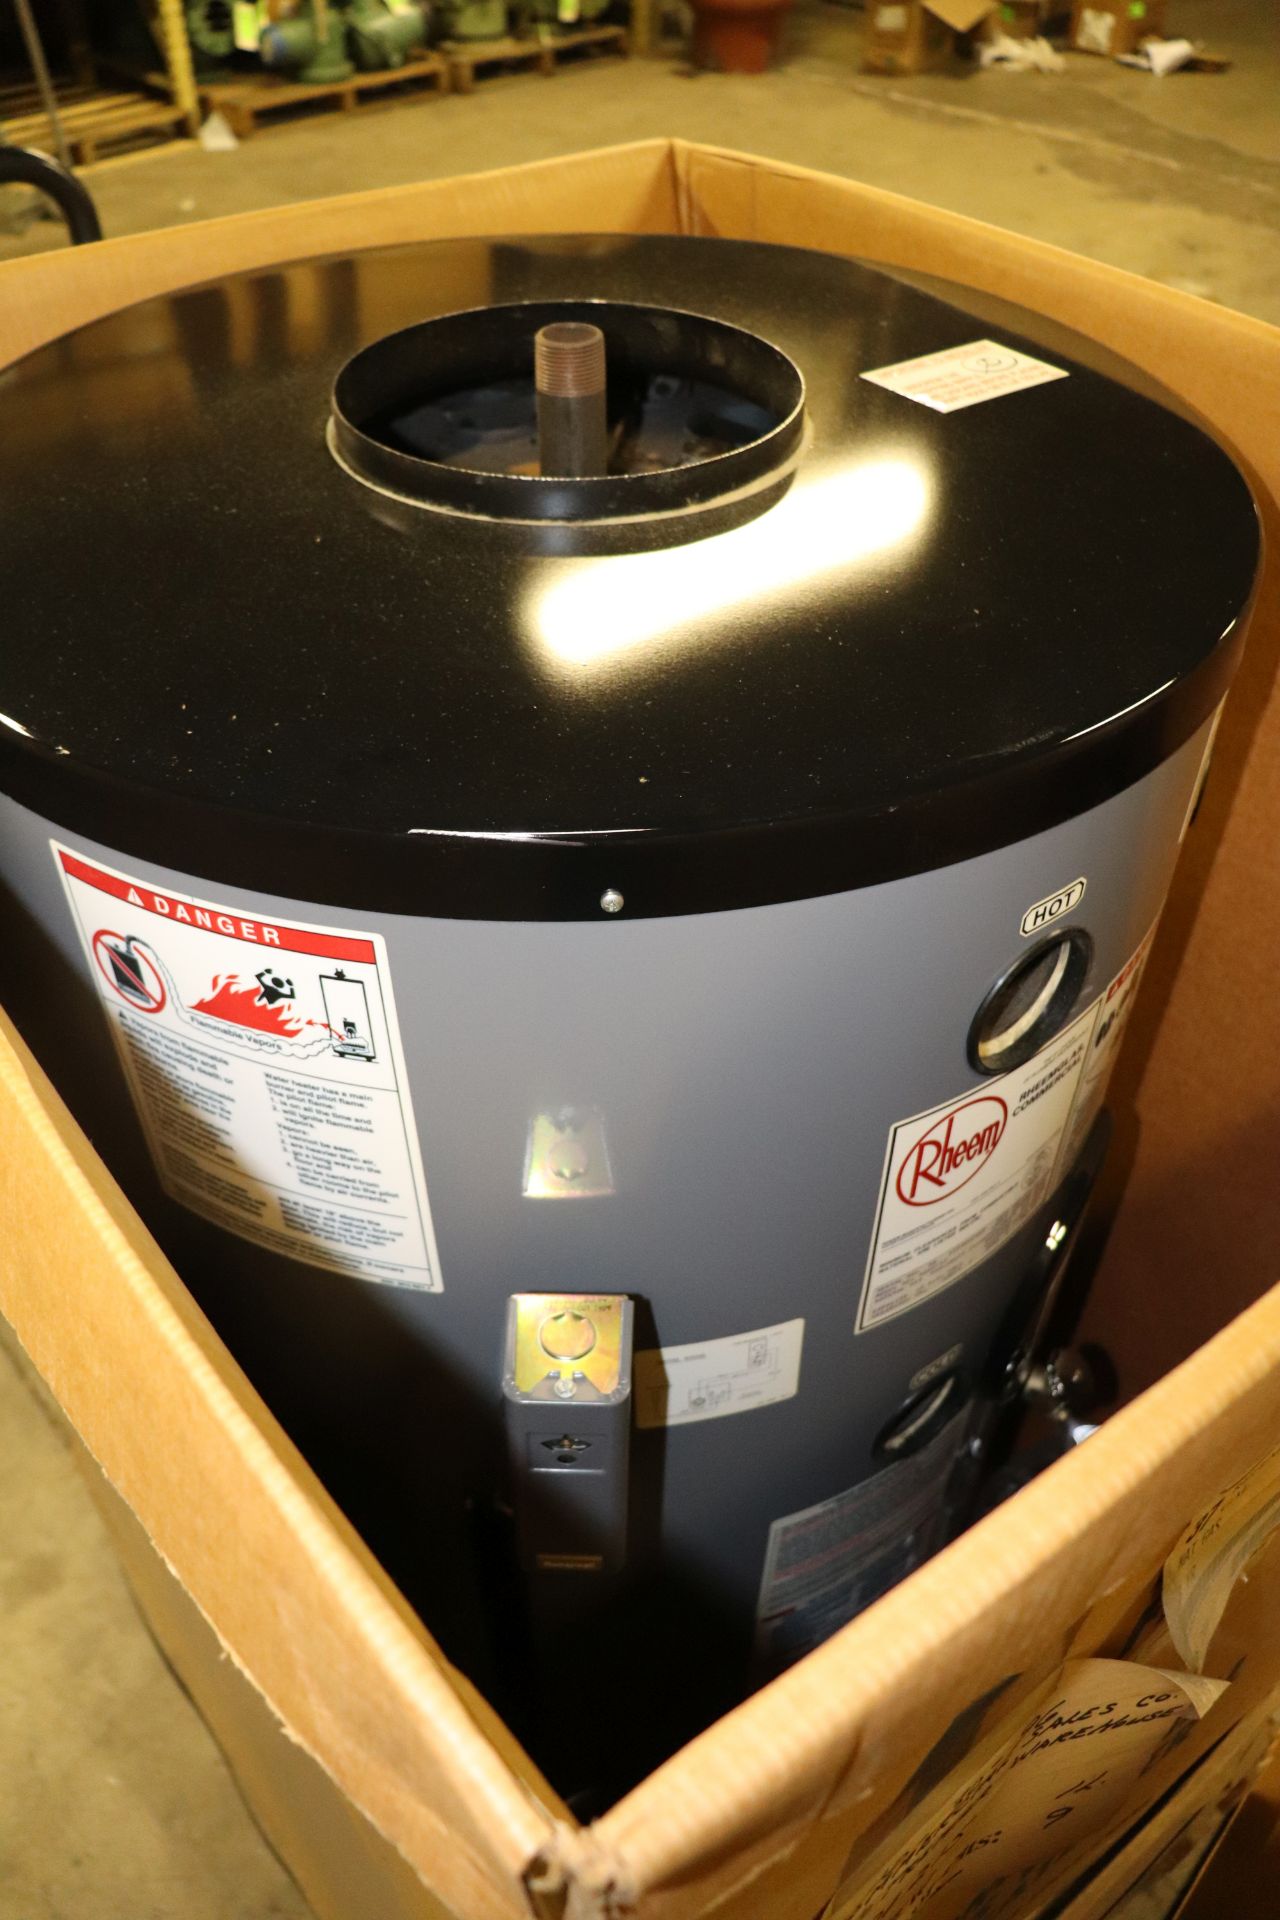 Rheem 37-gallon commercial water heater, new in box